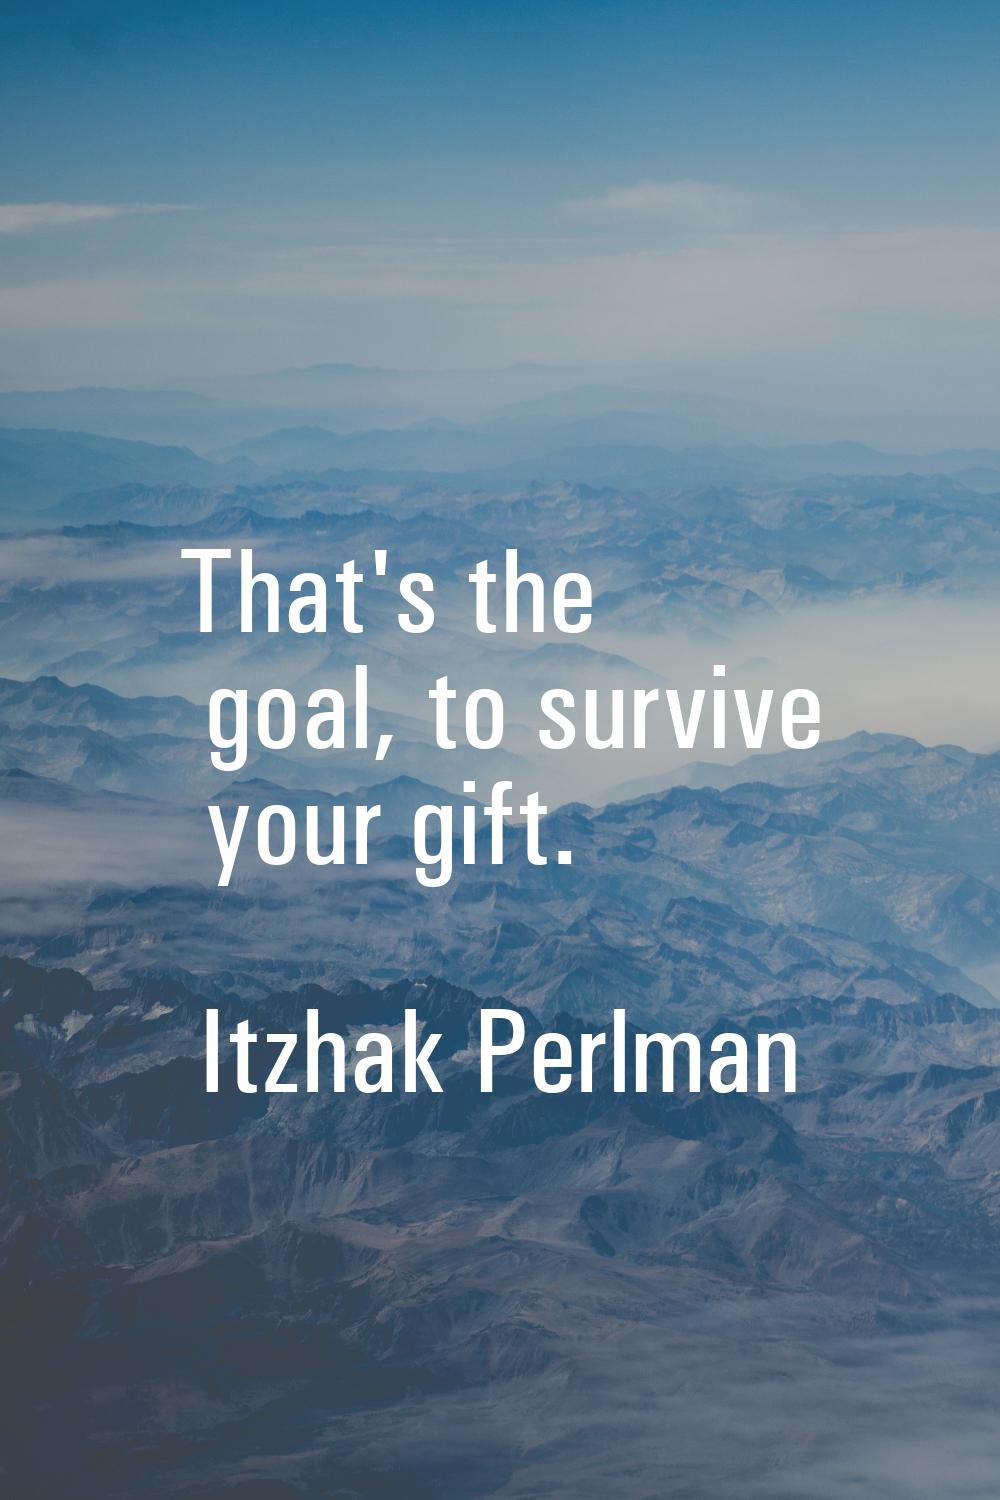 That's the goal, to survive your gift.